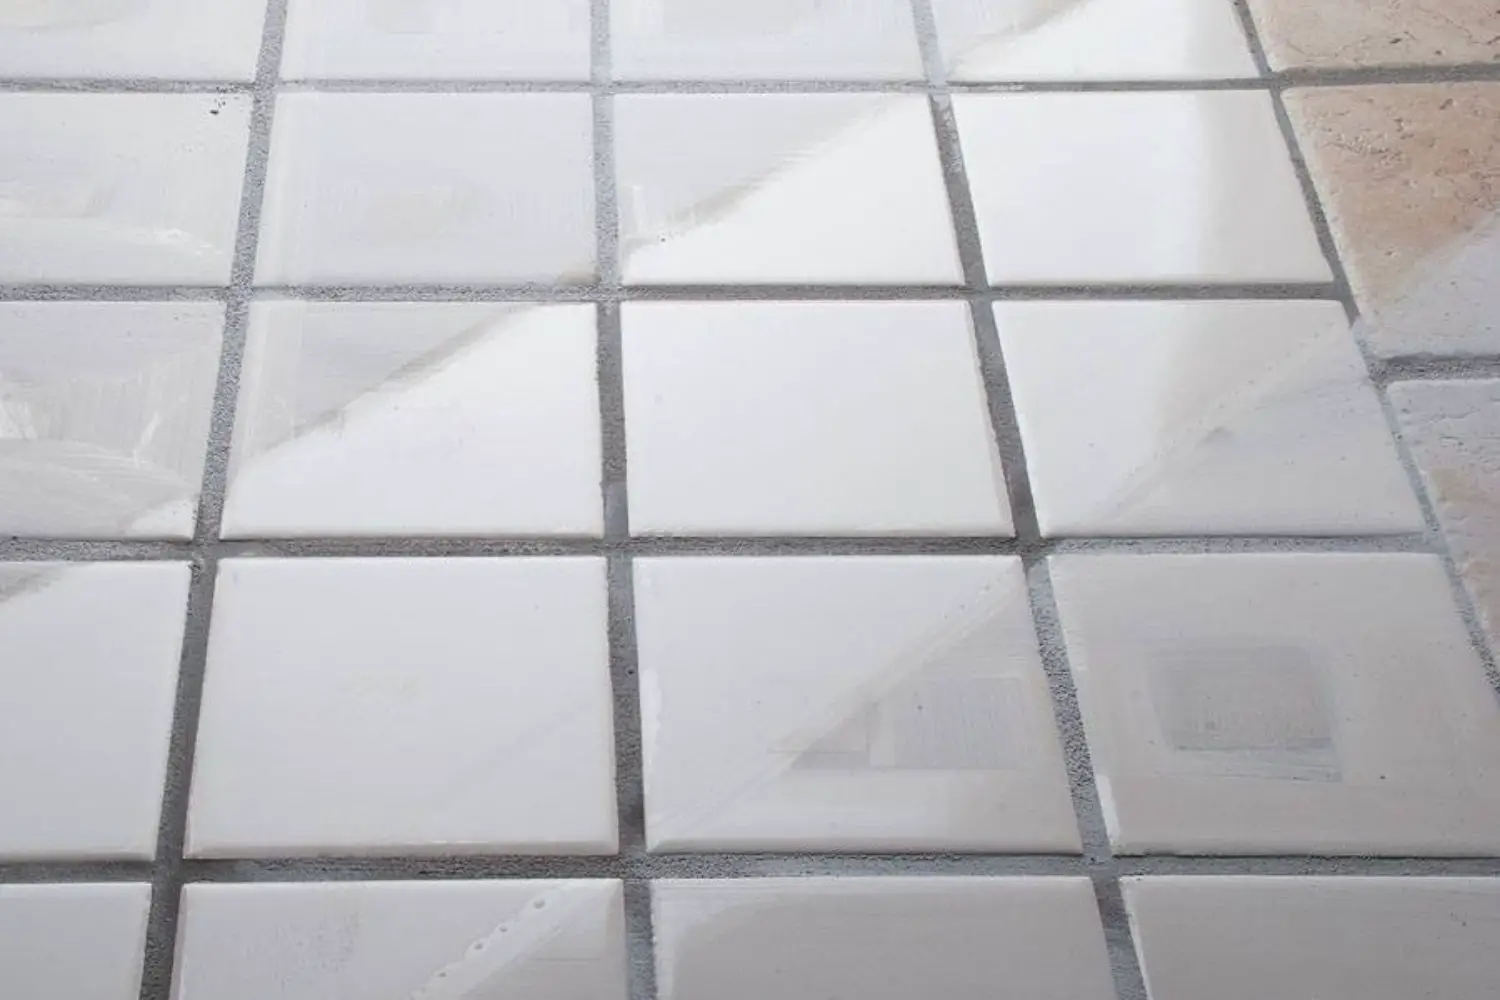 How to Remove Grout Haze from Porcelain Tile